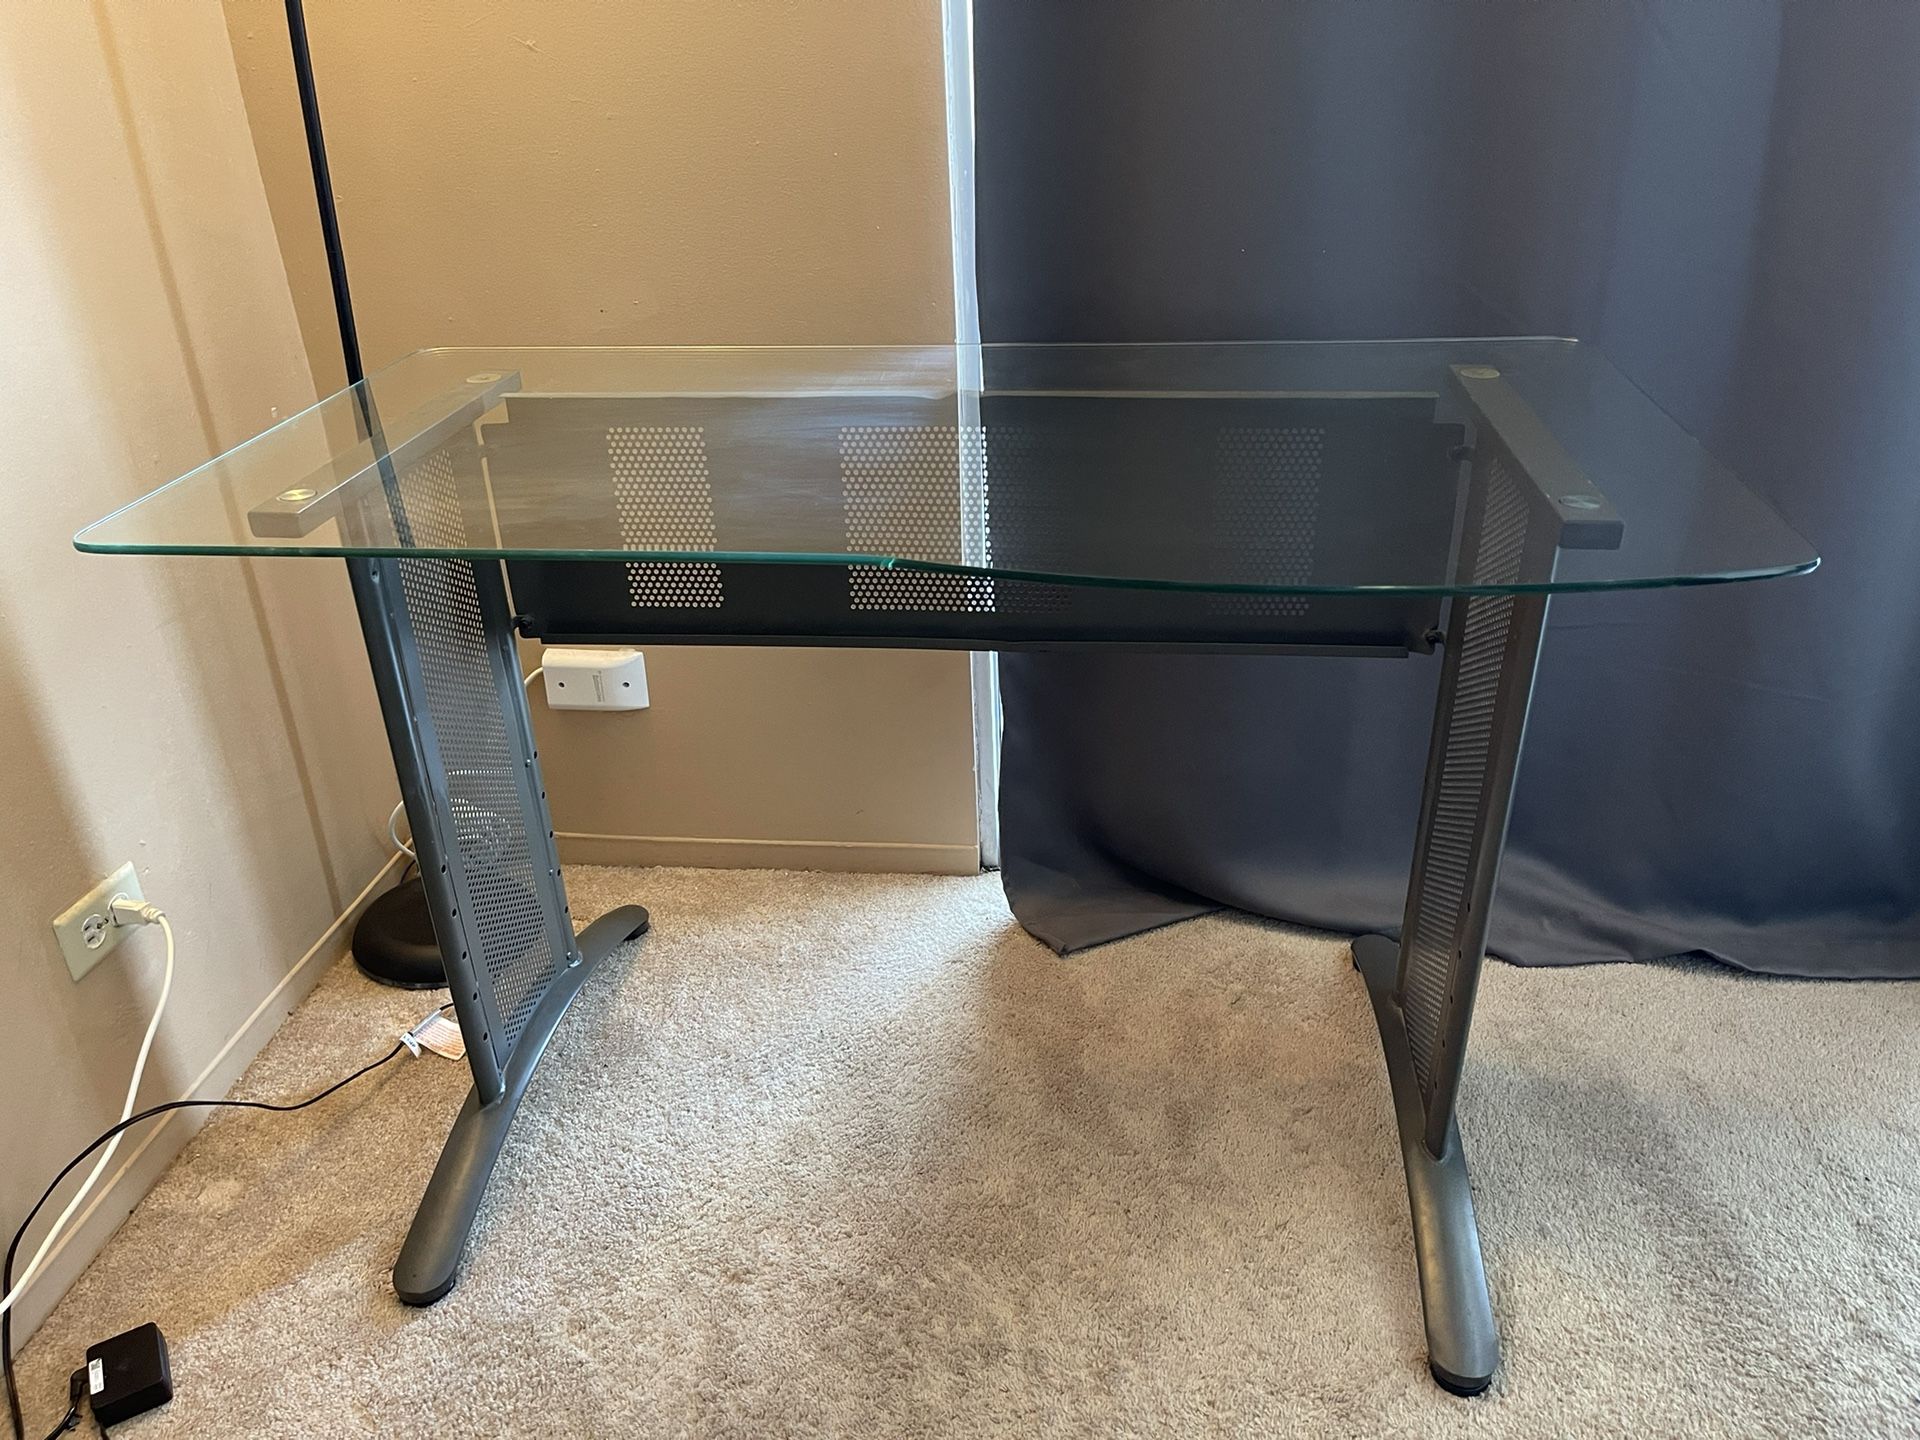 Computer Desk - Good For Home Office or Students